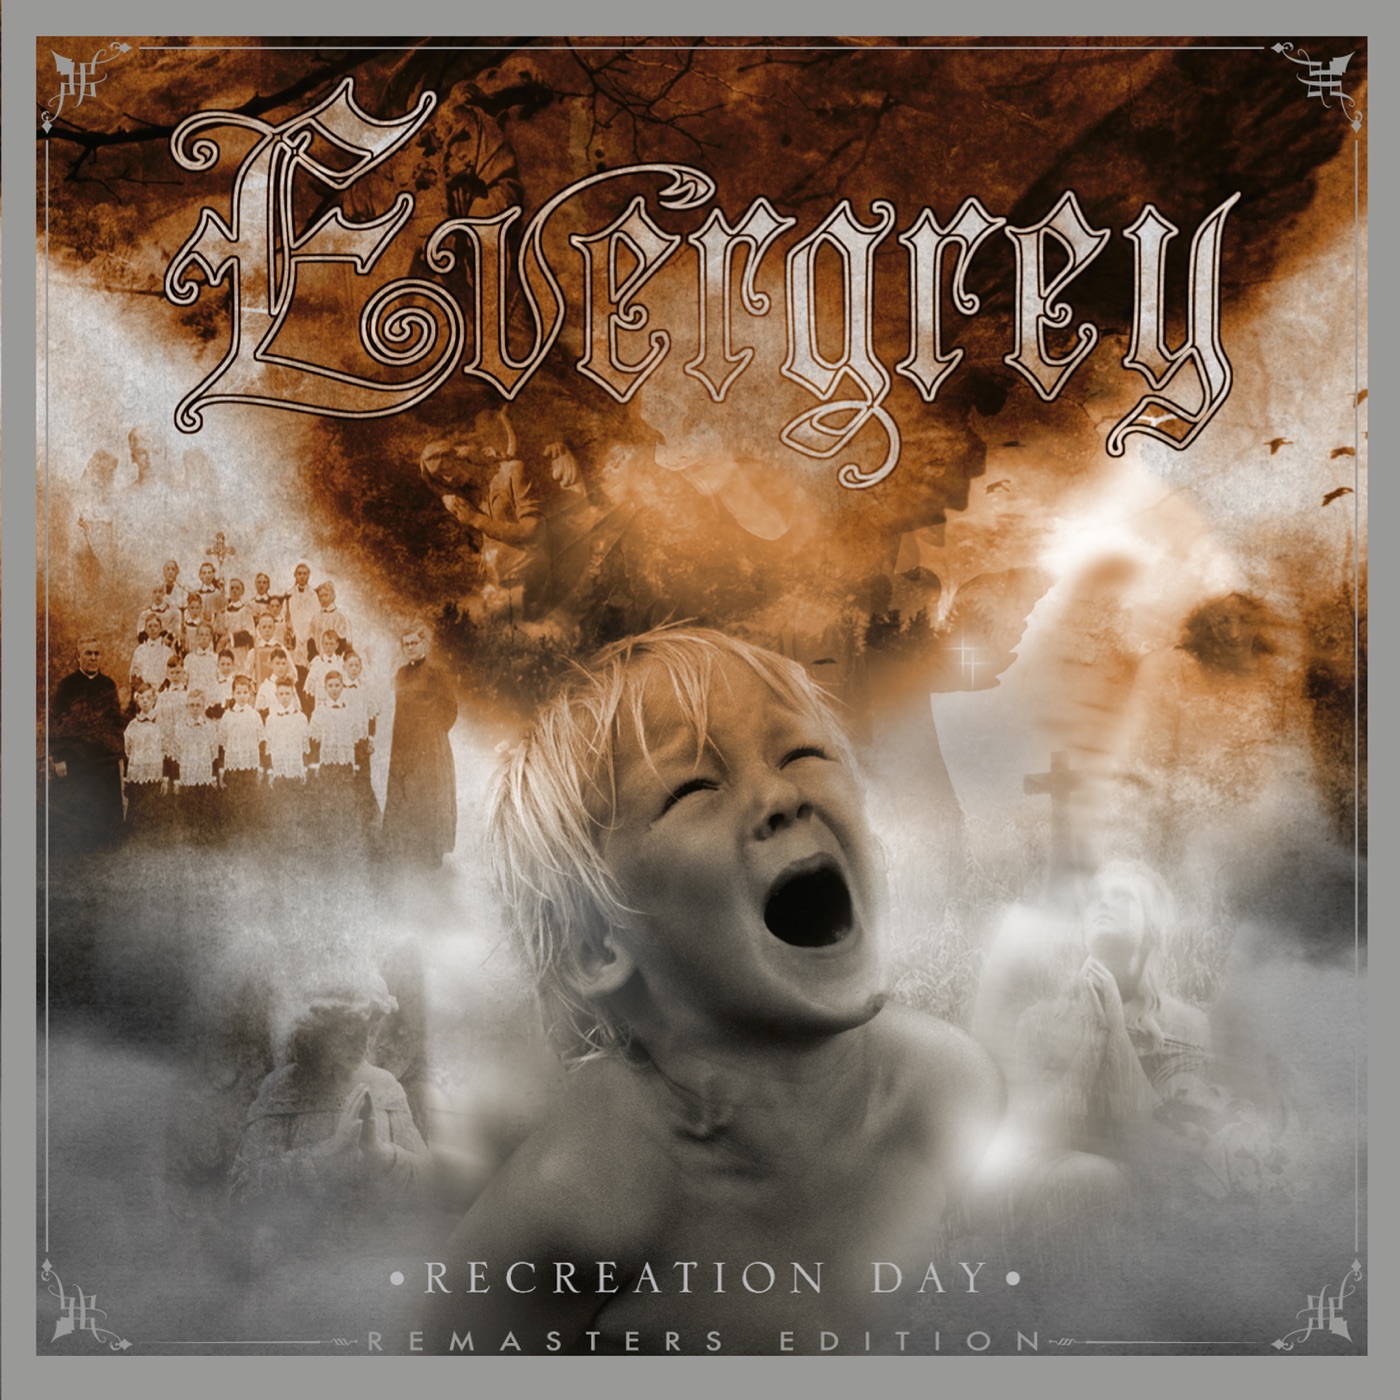 Recreation Day by Evergrey